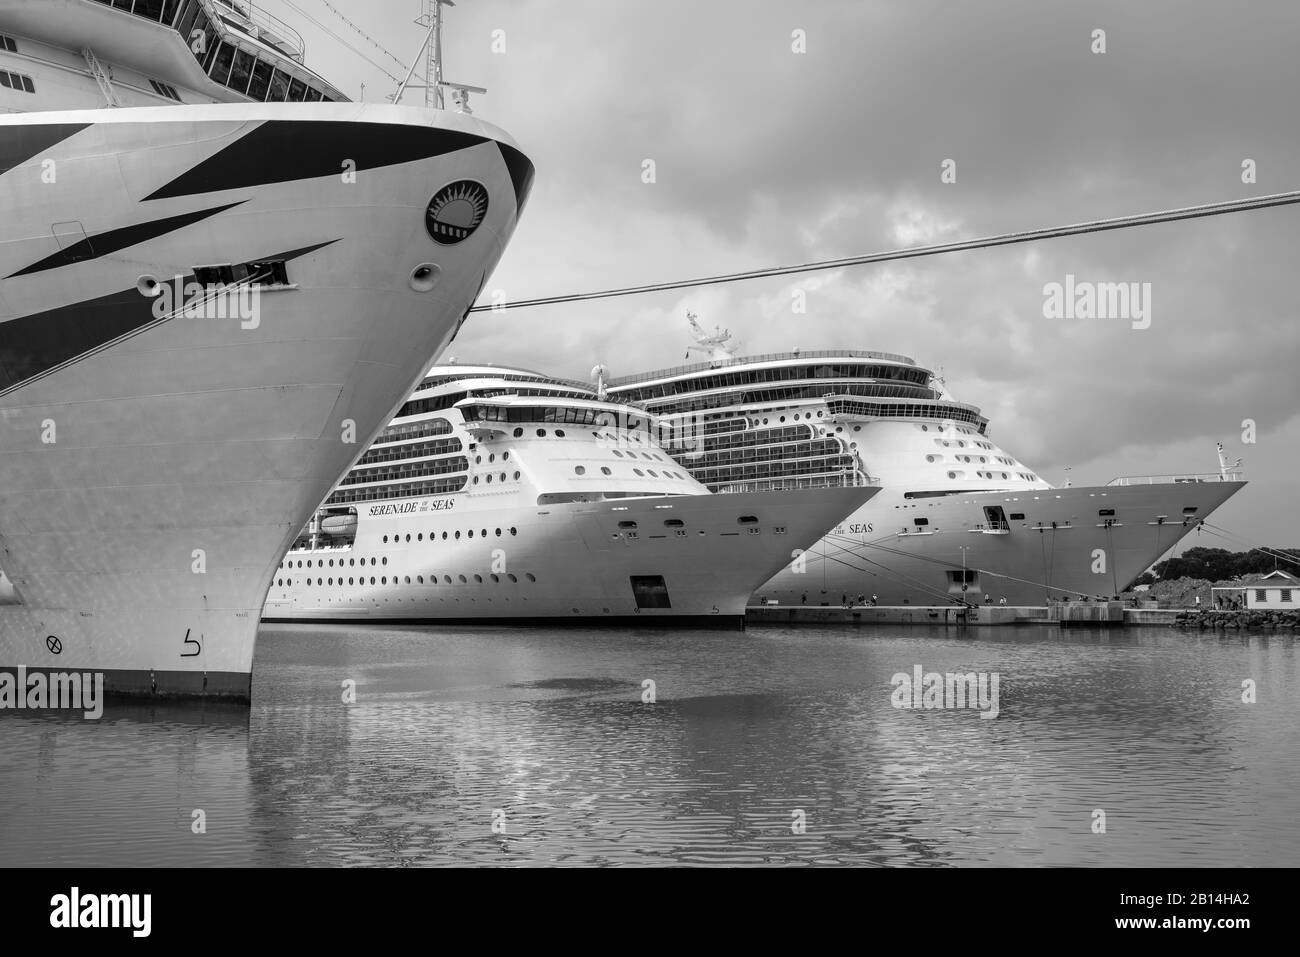 St John's, Antigua and Barbuda - December 18, 2018: Cruise ships moored at the port of Antigua on St John's in cloudy weather, Antigua and Barbuda. Bl Stock Photo